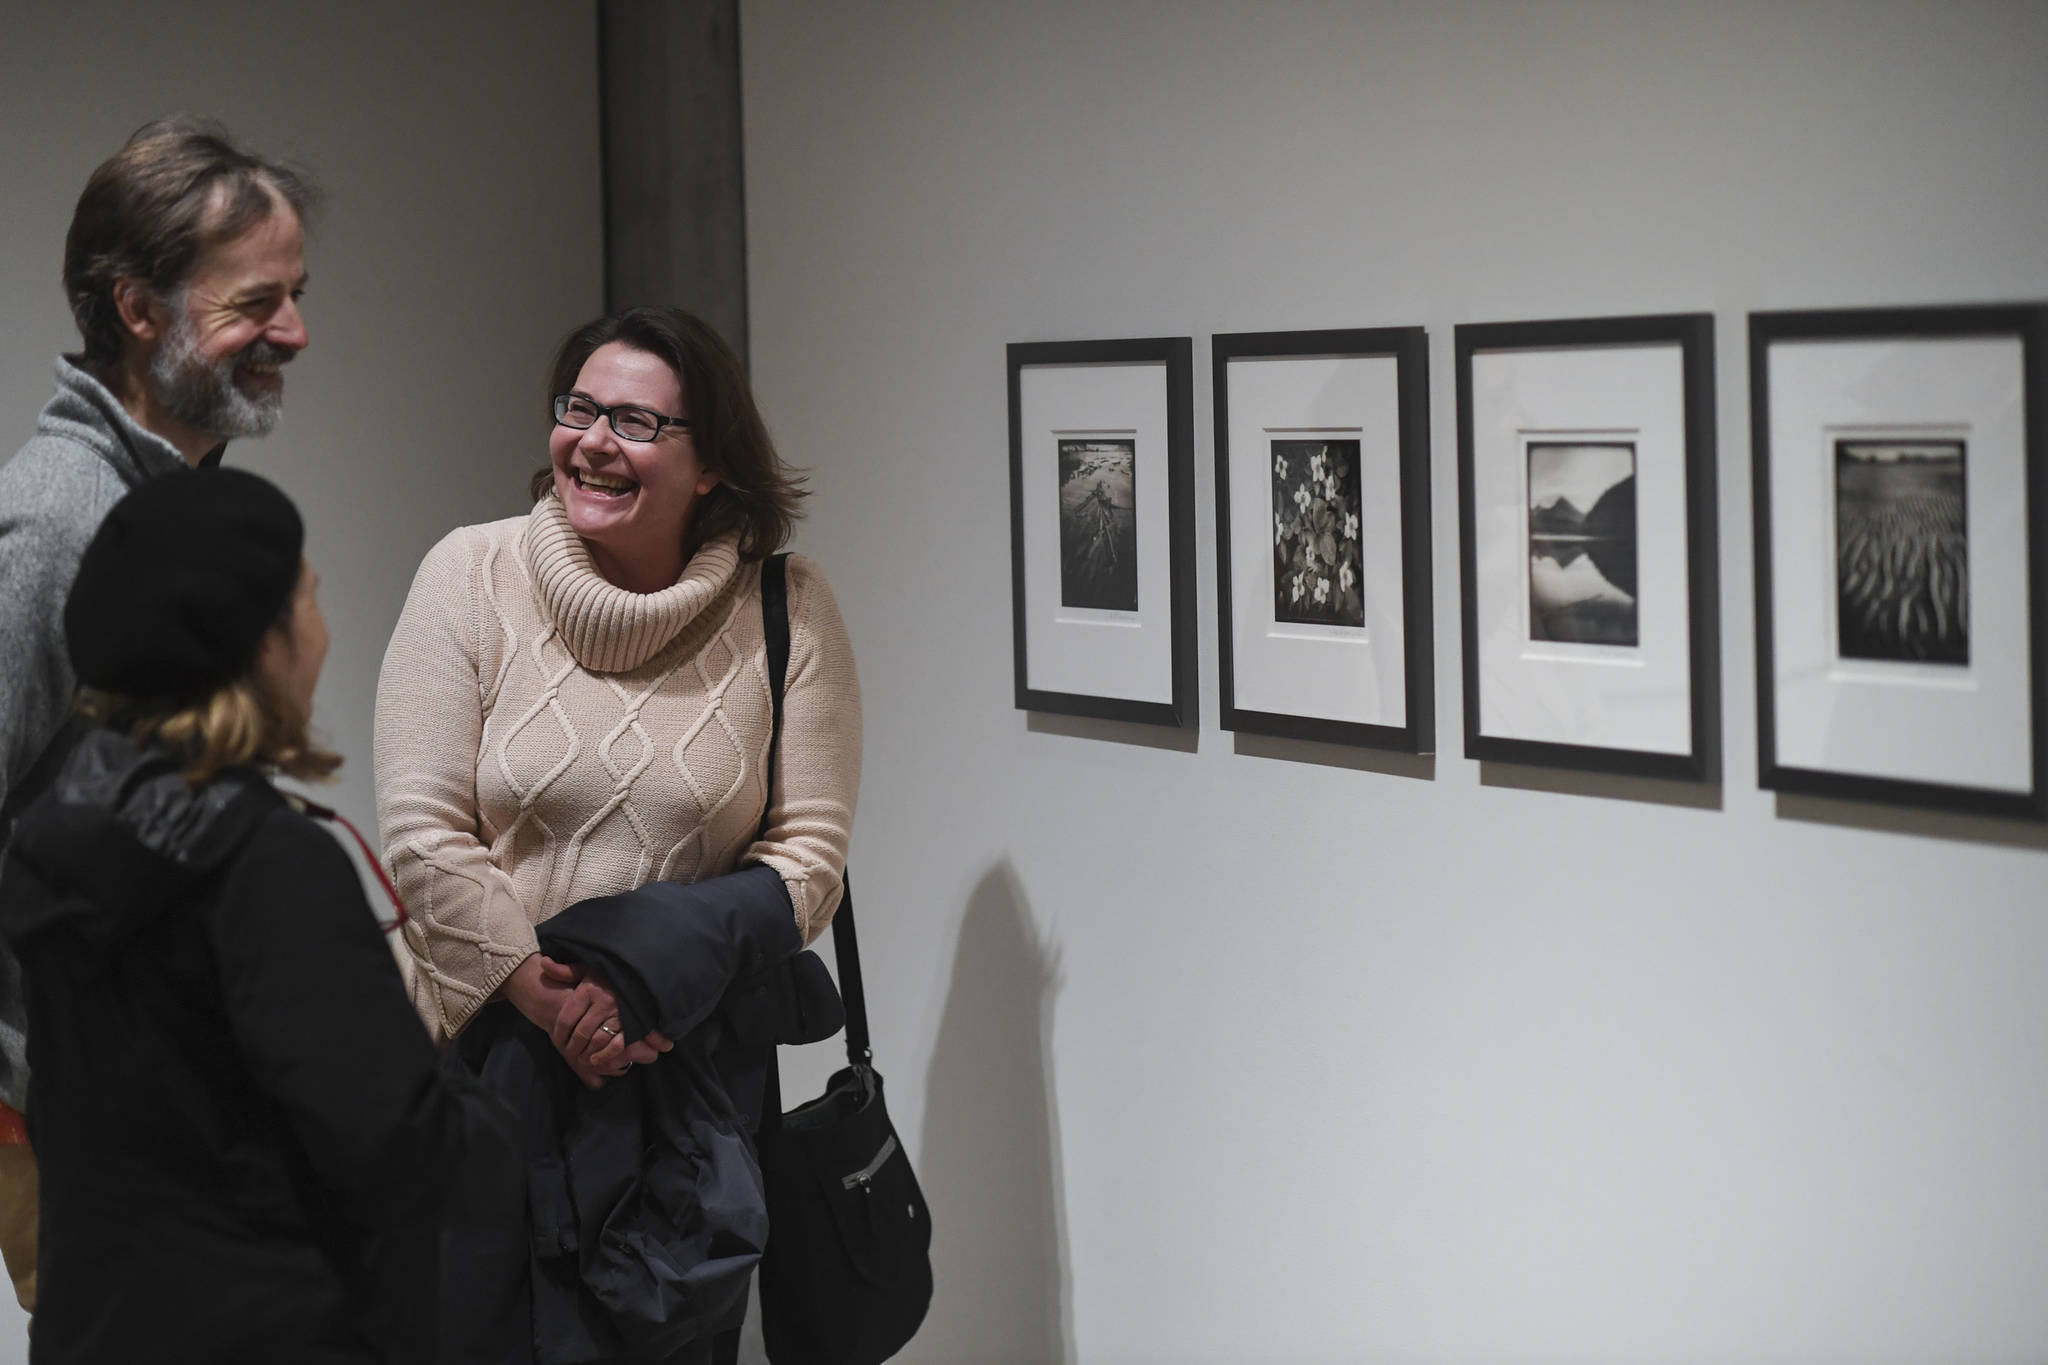 Iris Korhonen-Penn, right, talks with friends Mike Hekkers and Di Johnson about her work at the Alaska Positive juried photography exhibit at the Alaska State Museum during Gallery Walk on Friday, Dec. 6, 2019. Korhonen-Penn of Juneau received an Award of Recognition for her set of four pictures. (Michael Penn | Juneau Empire)